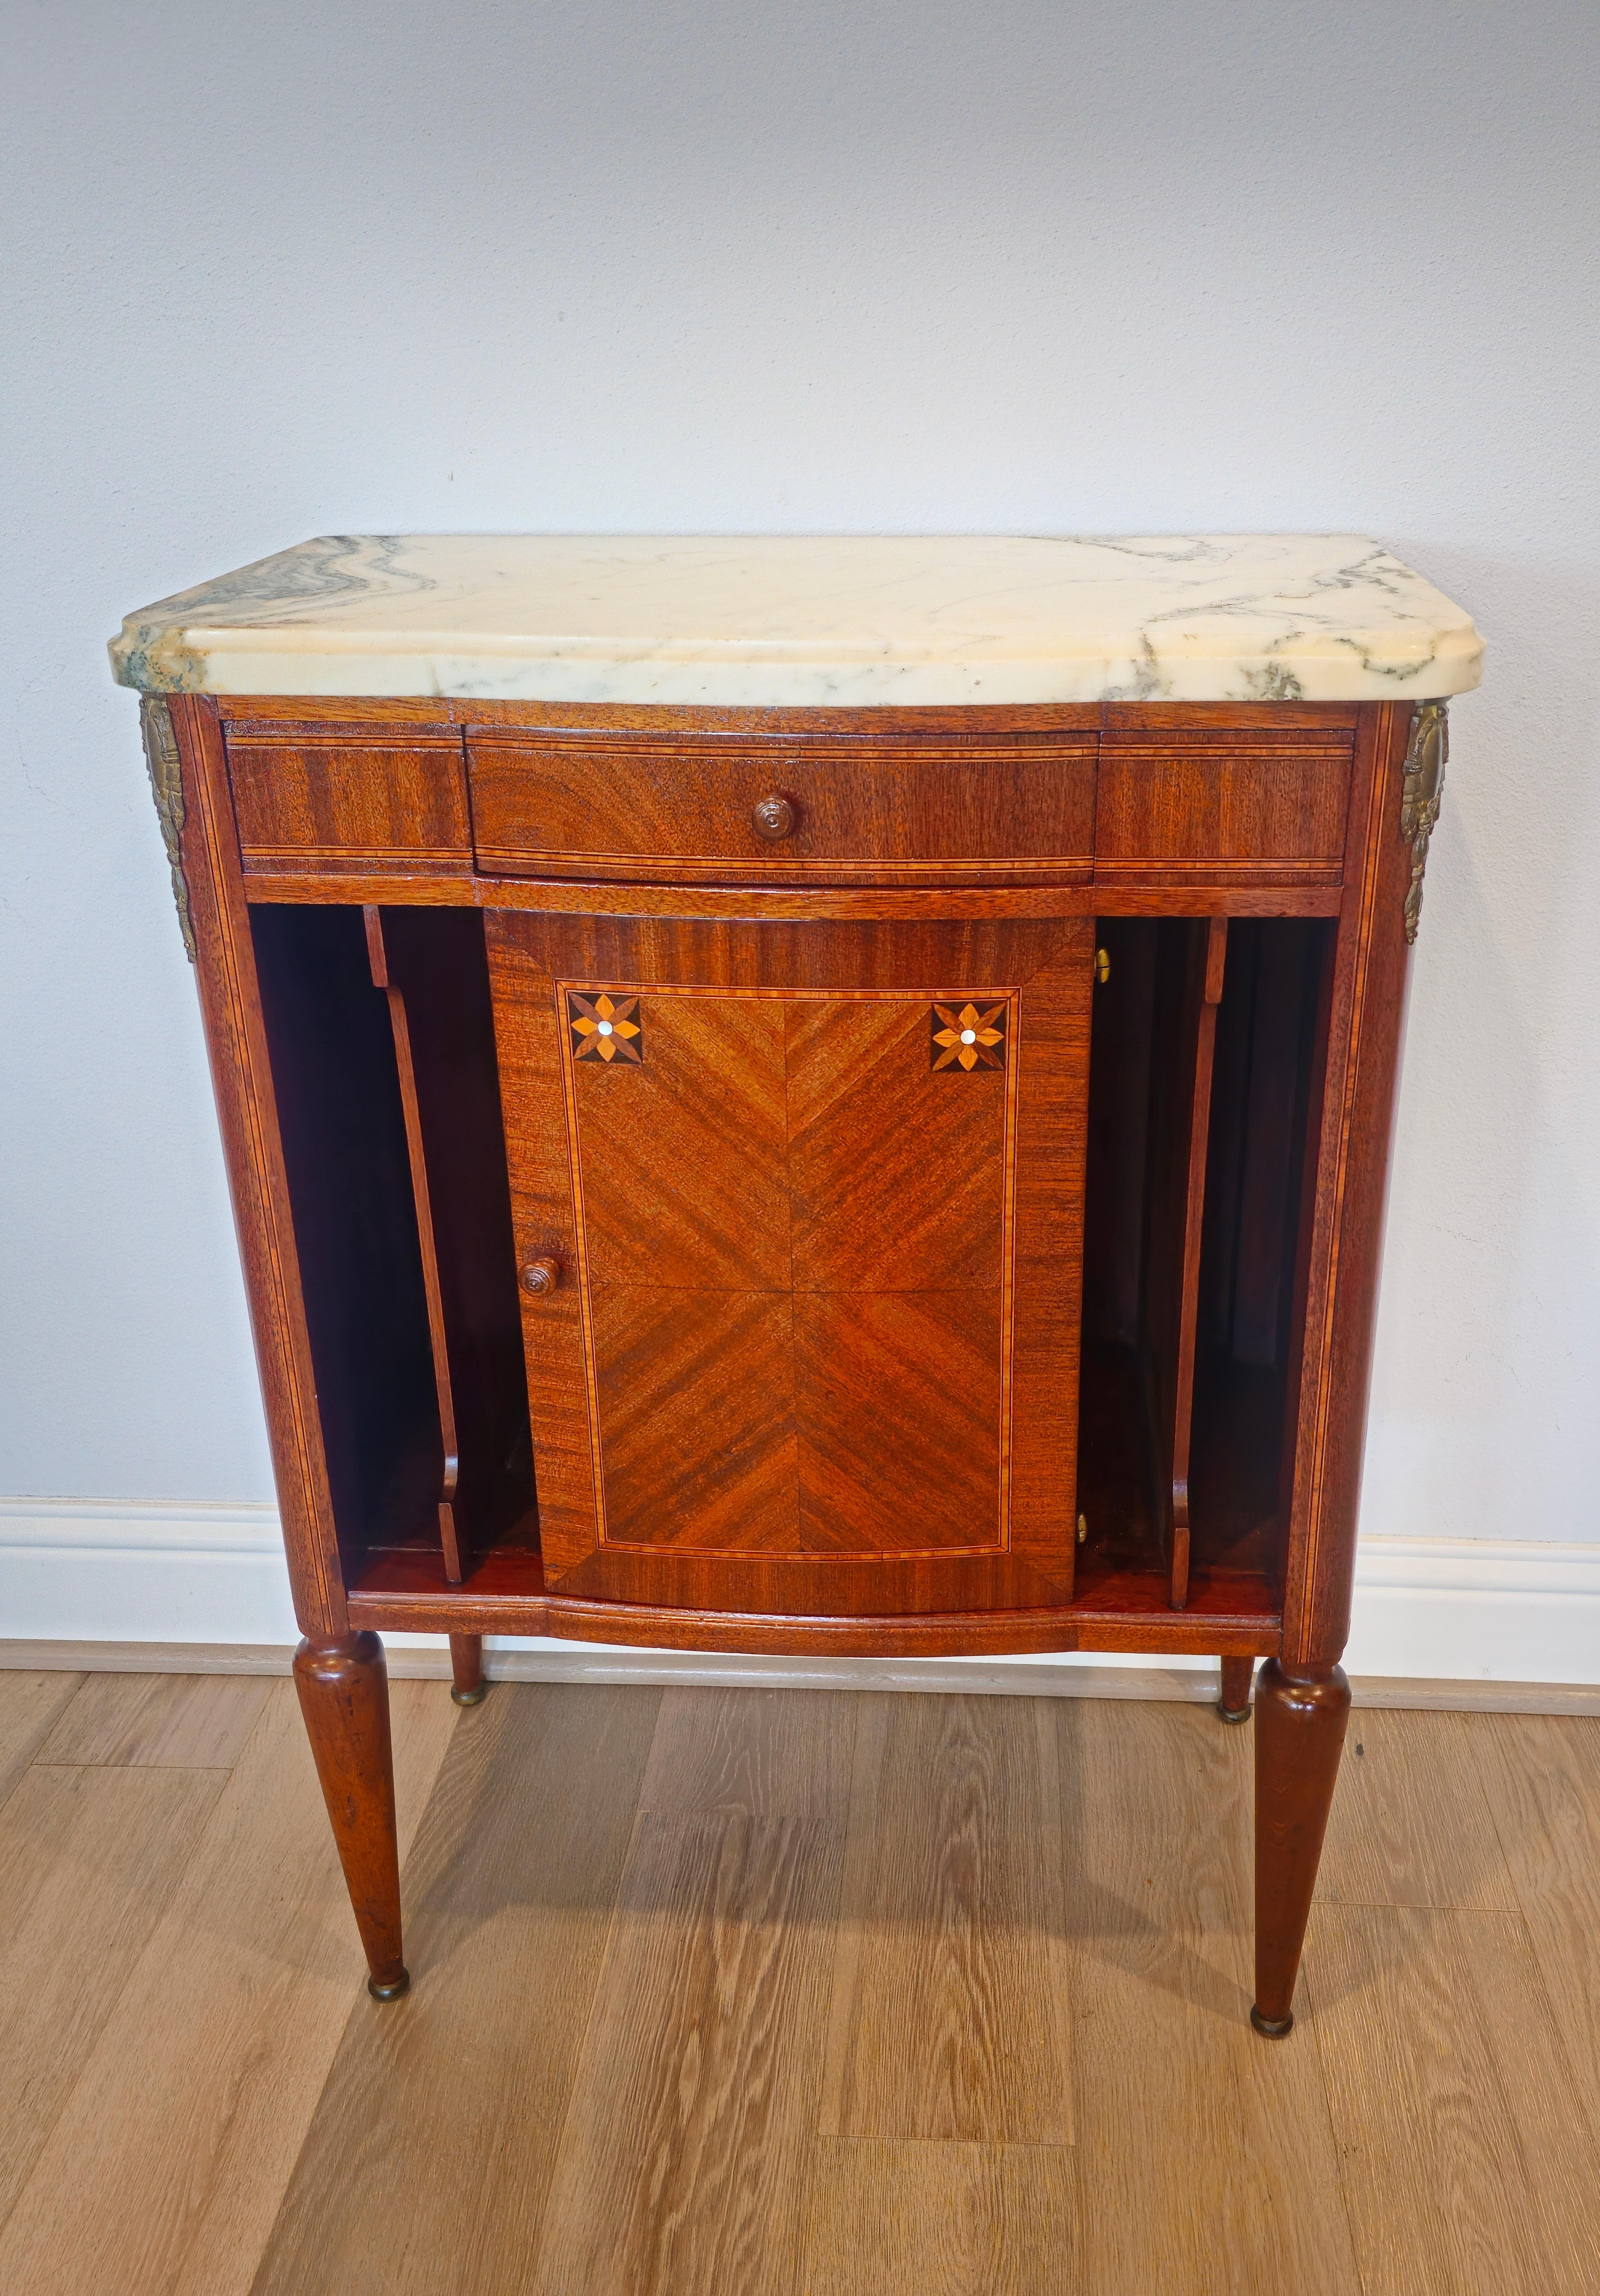 1920s French Art Deco Louis XVI Style Mahogany Bedside Cabinet  In Good Condition For Sale In Forney, TX